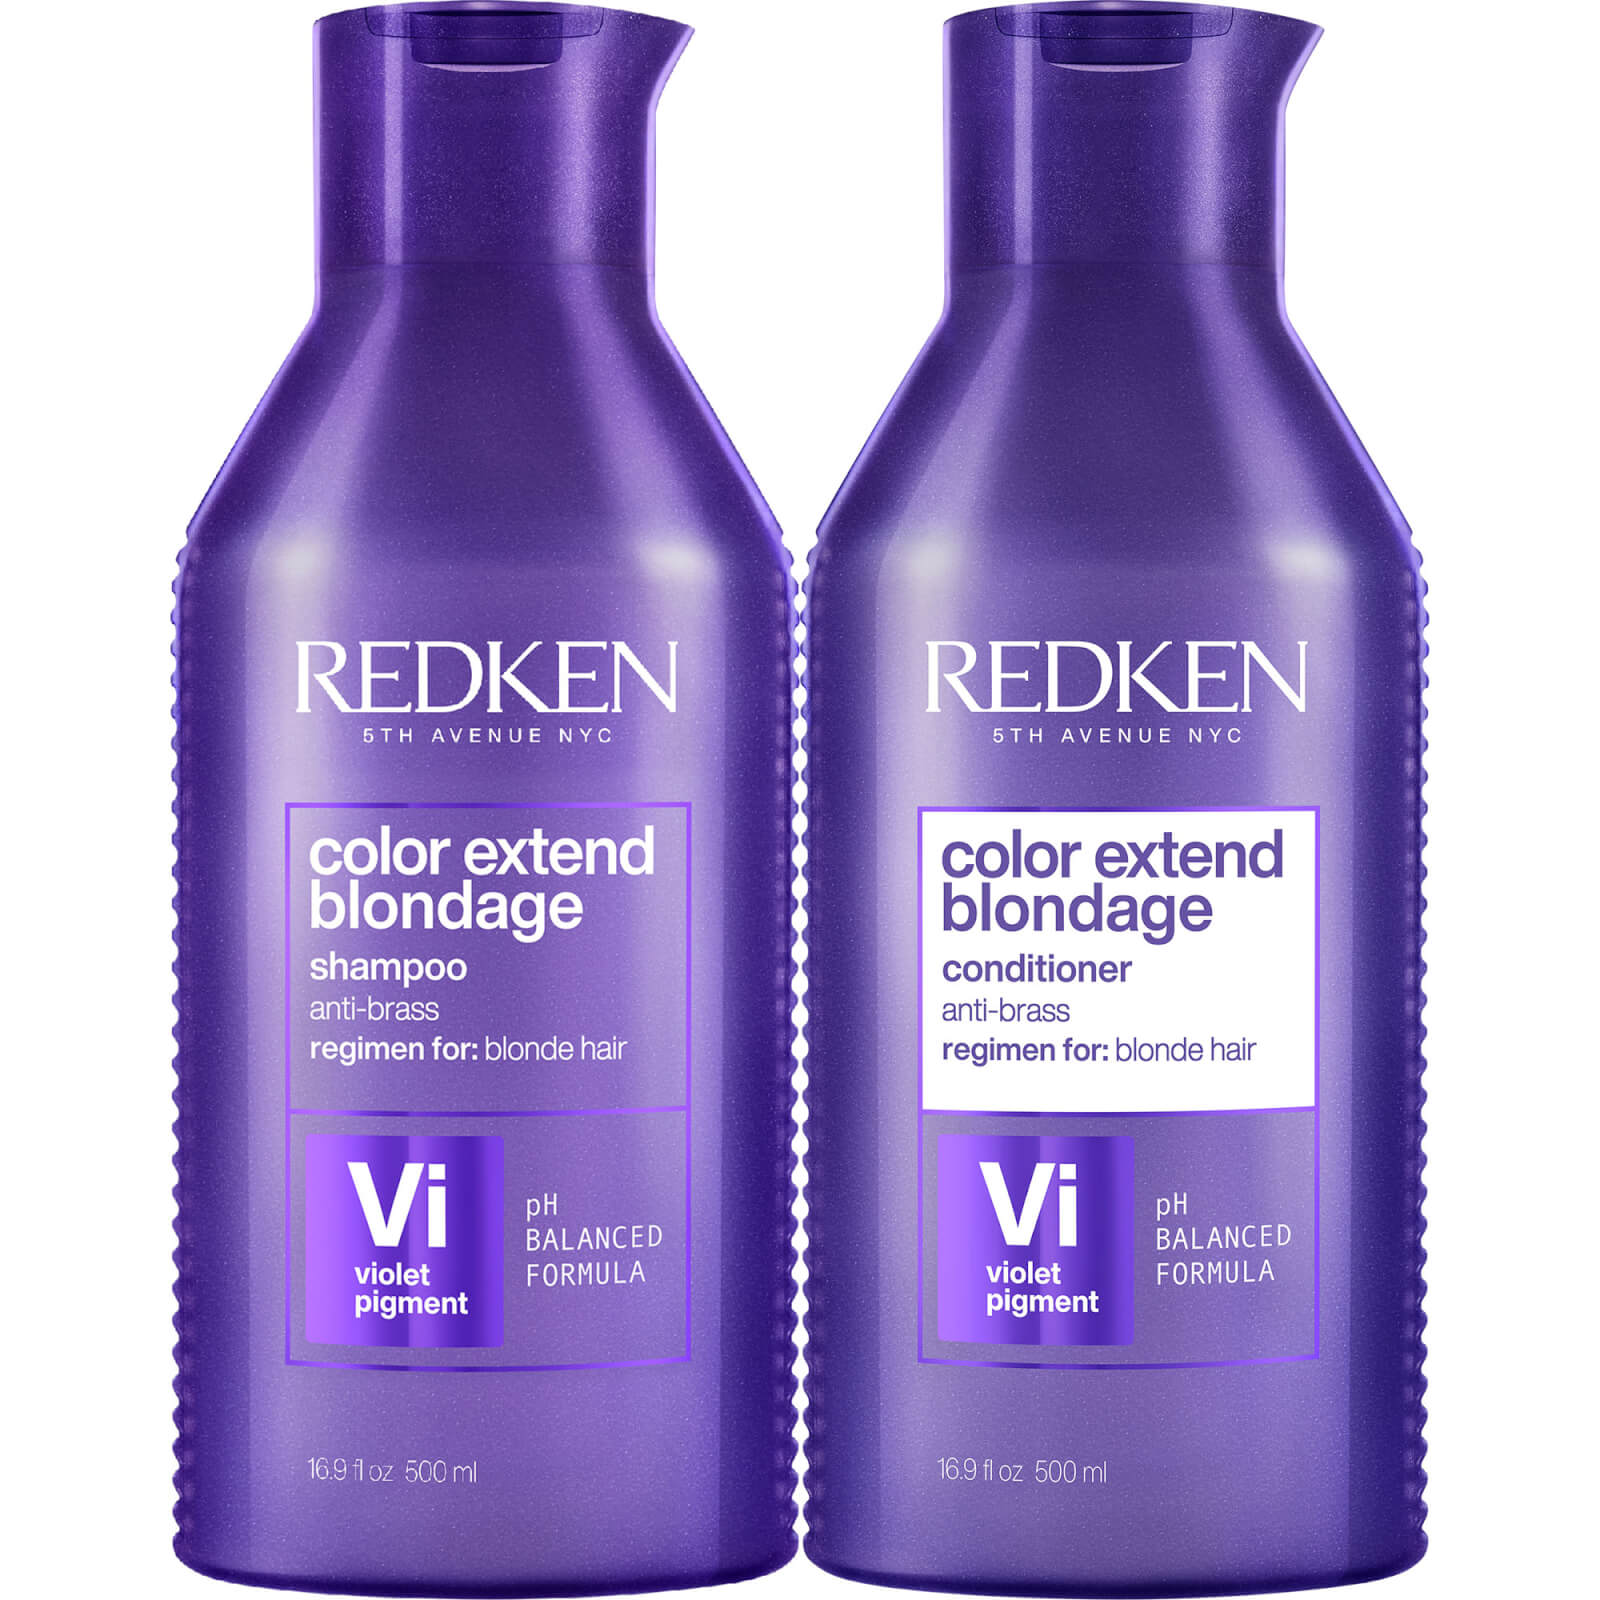 Redken Color Extend Blondage Shampoo And Conditioner Routine For Eliminating Brassiness In Blonde Hair 500m